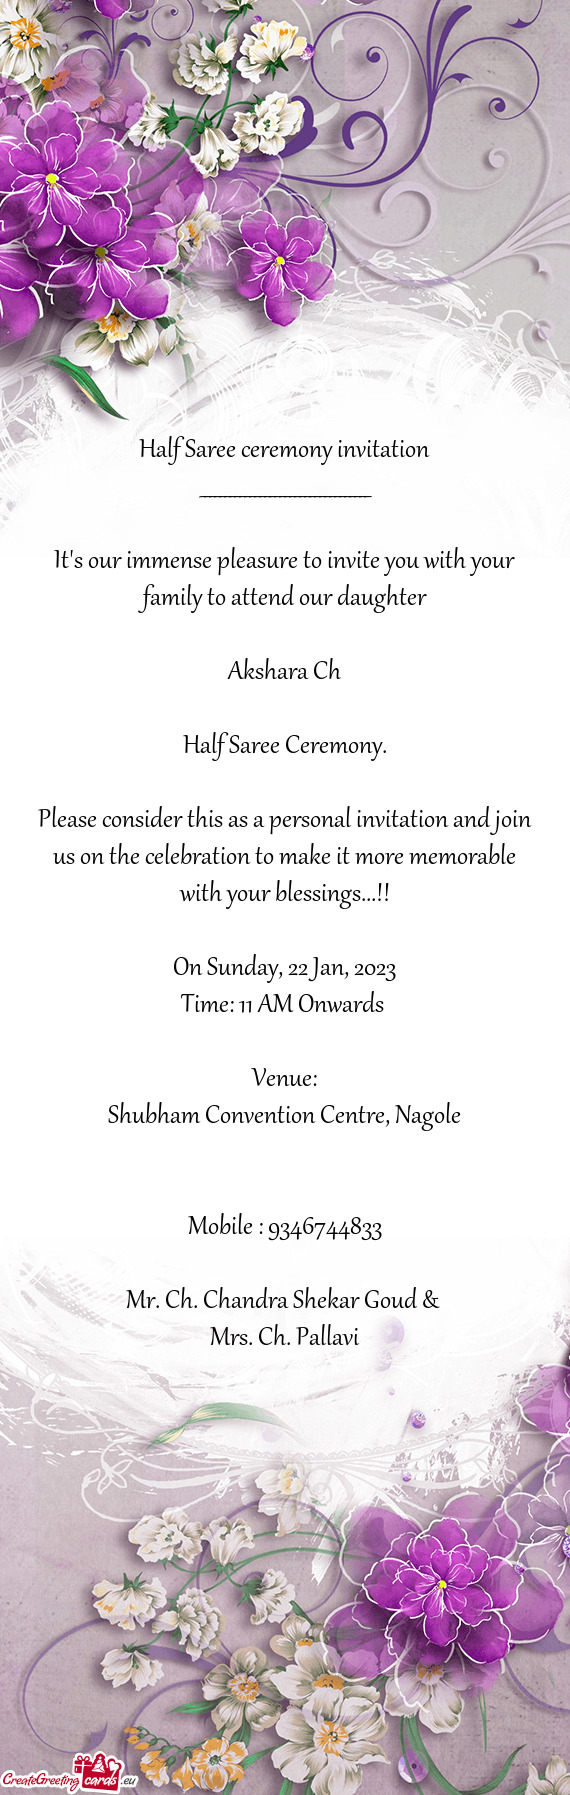 Shubham Convention Centre, Nagole